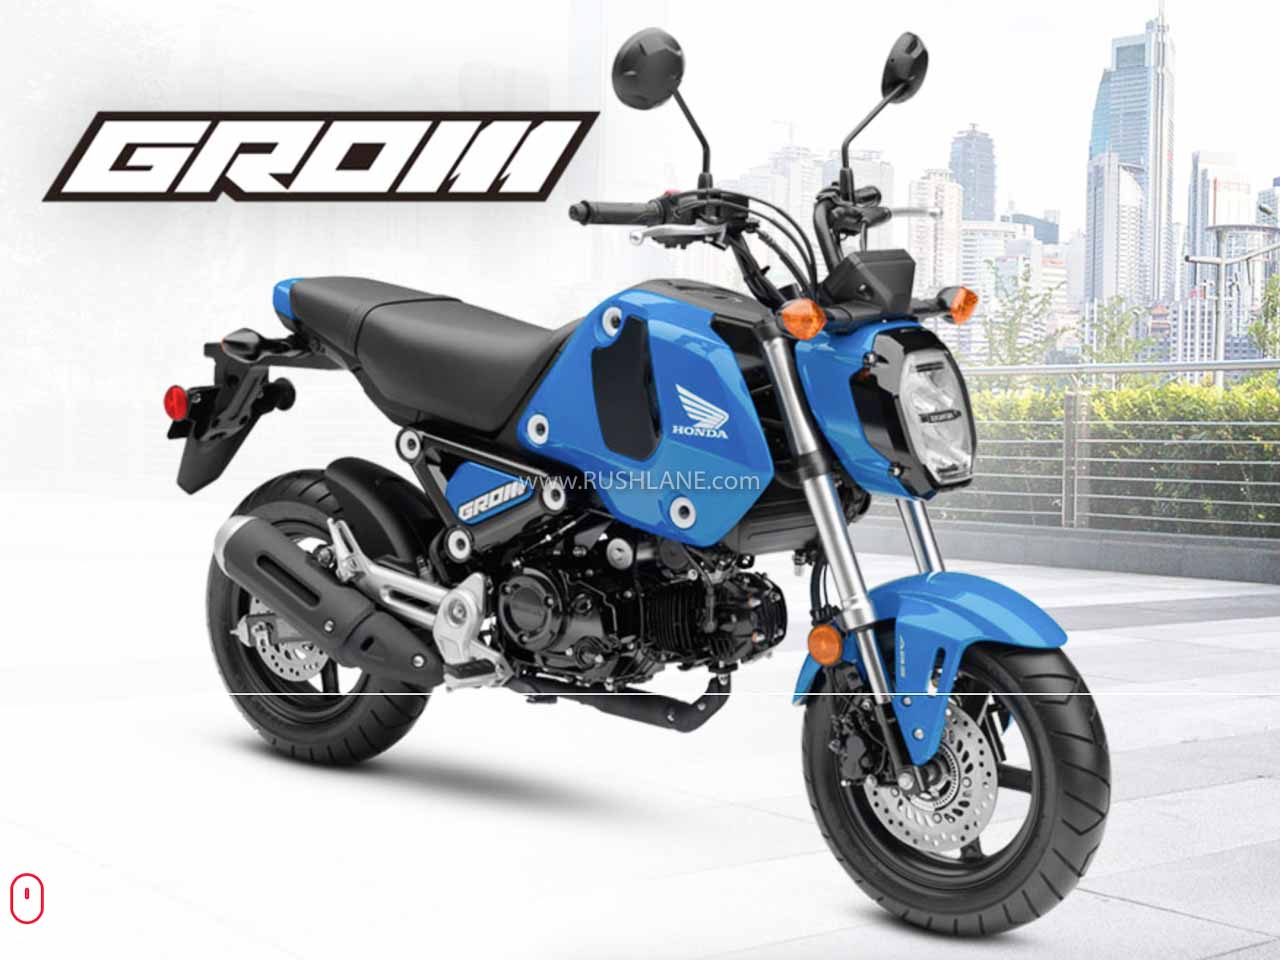 Honda Grom 125 Gets Updated With New Features, Colours Higher Top Speed